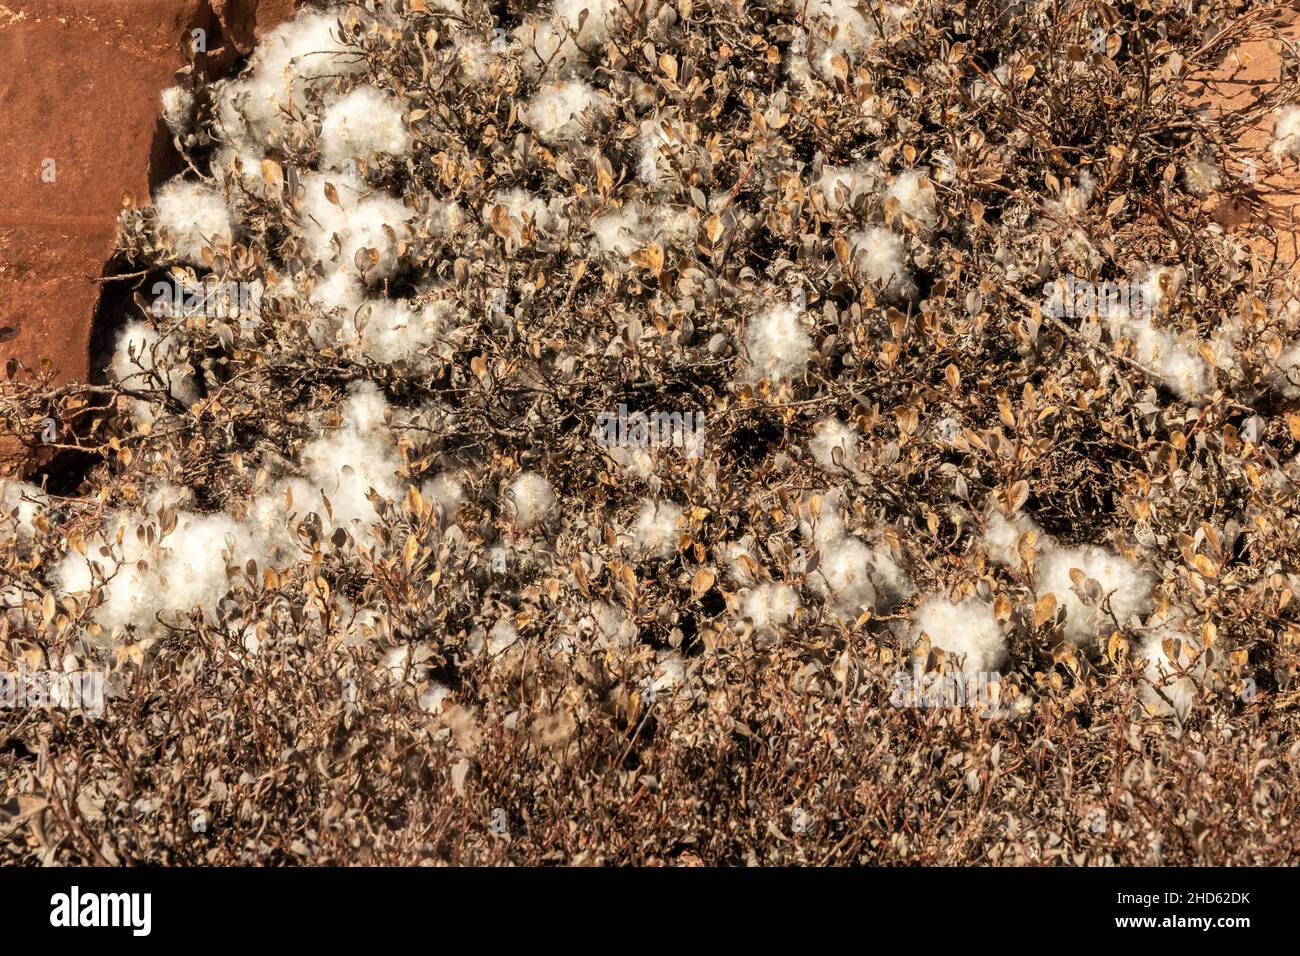 Close-up of Cotton grass (Eriophorum callitrix) in the fall, Rode O, Rodefjord, Scoresby Sund, Greenland Stock Photo